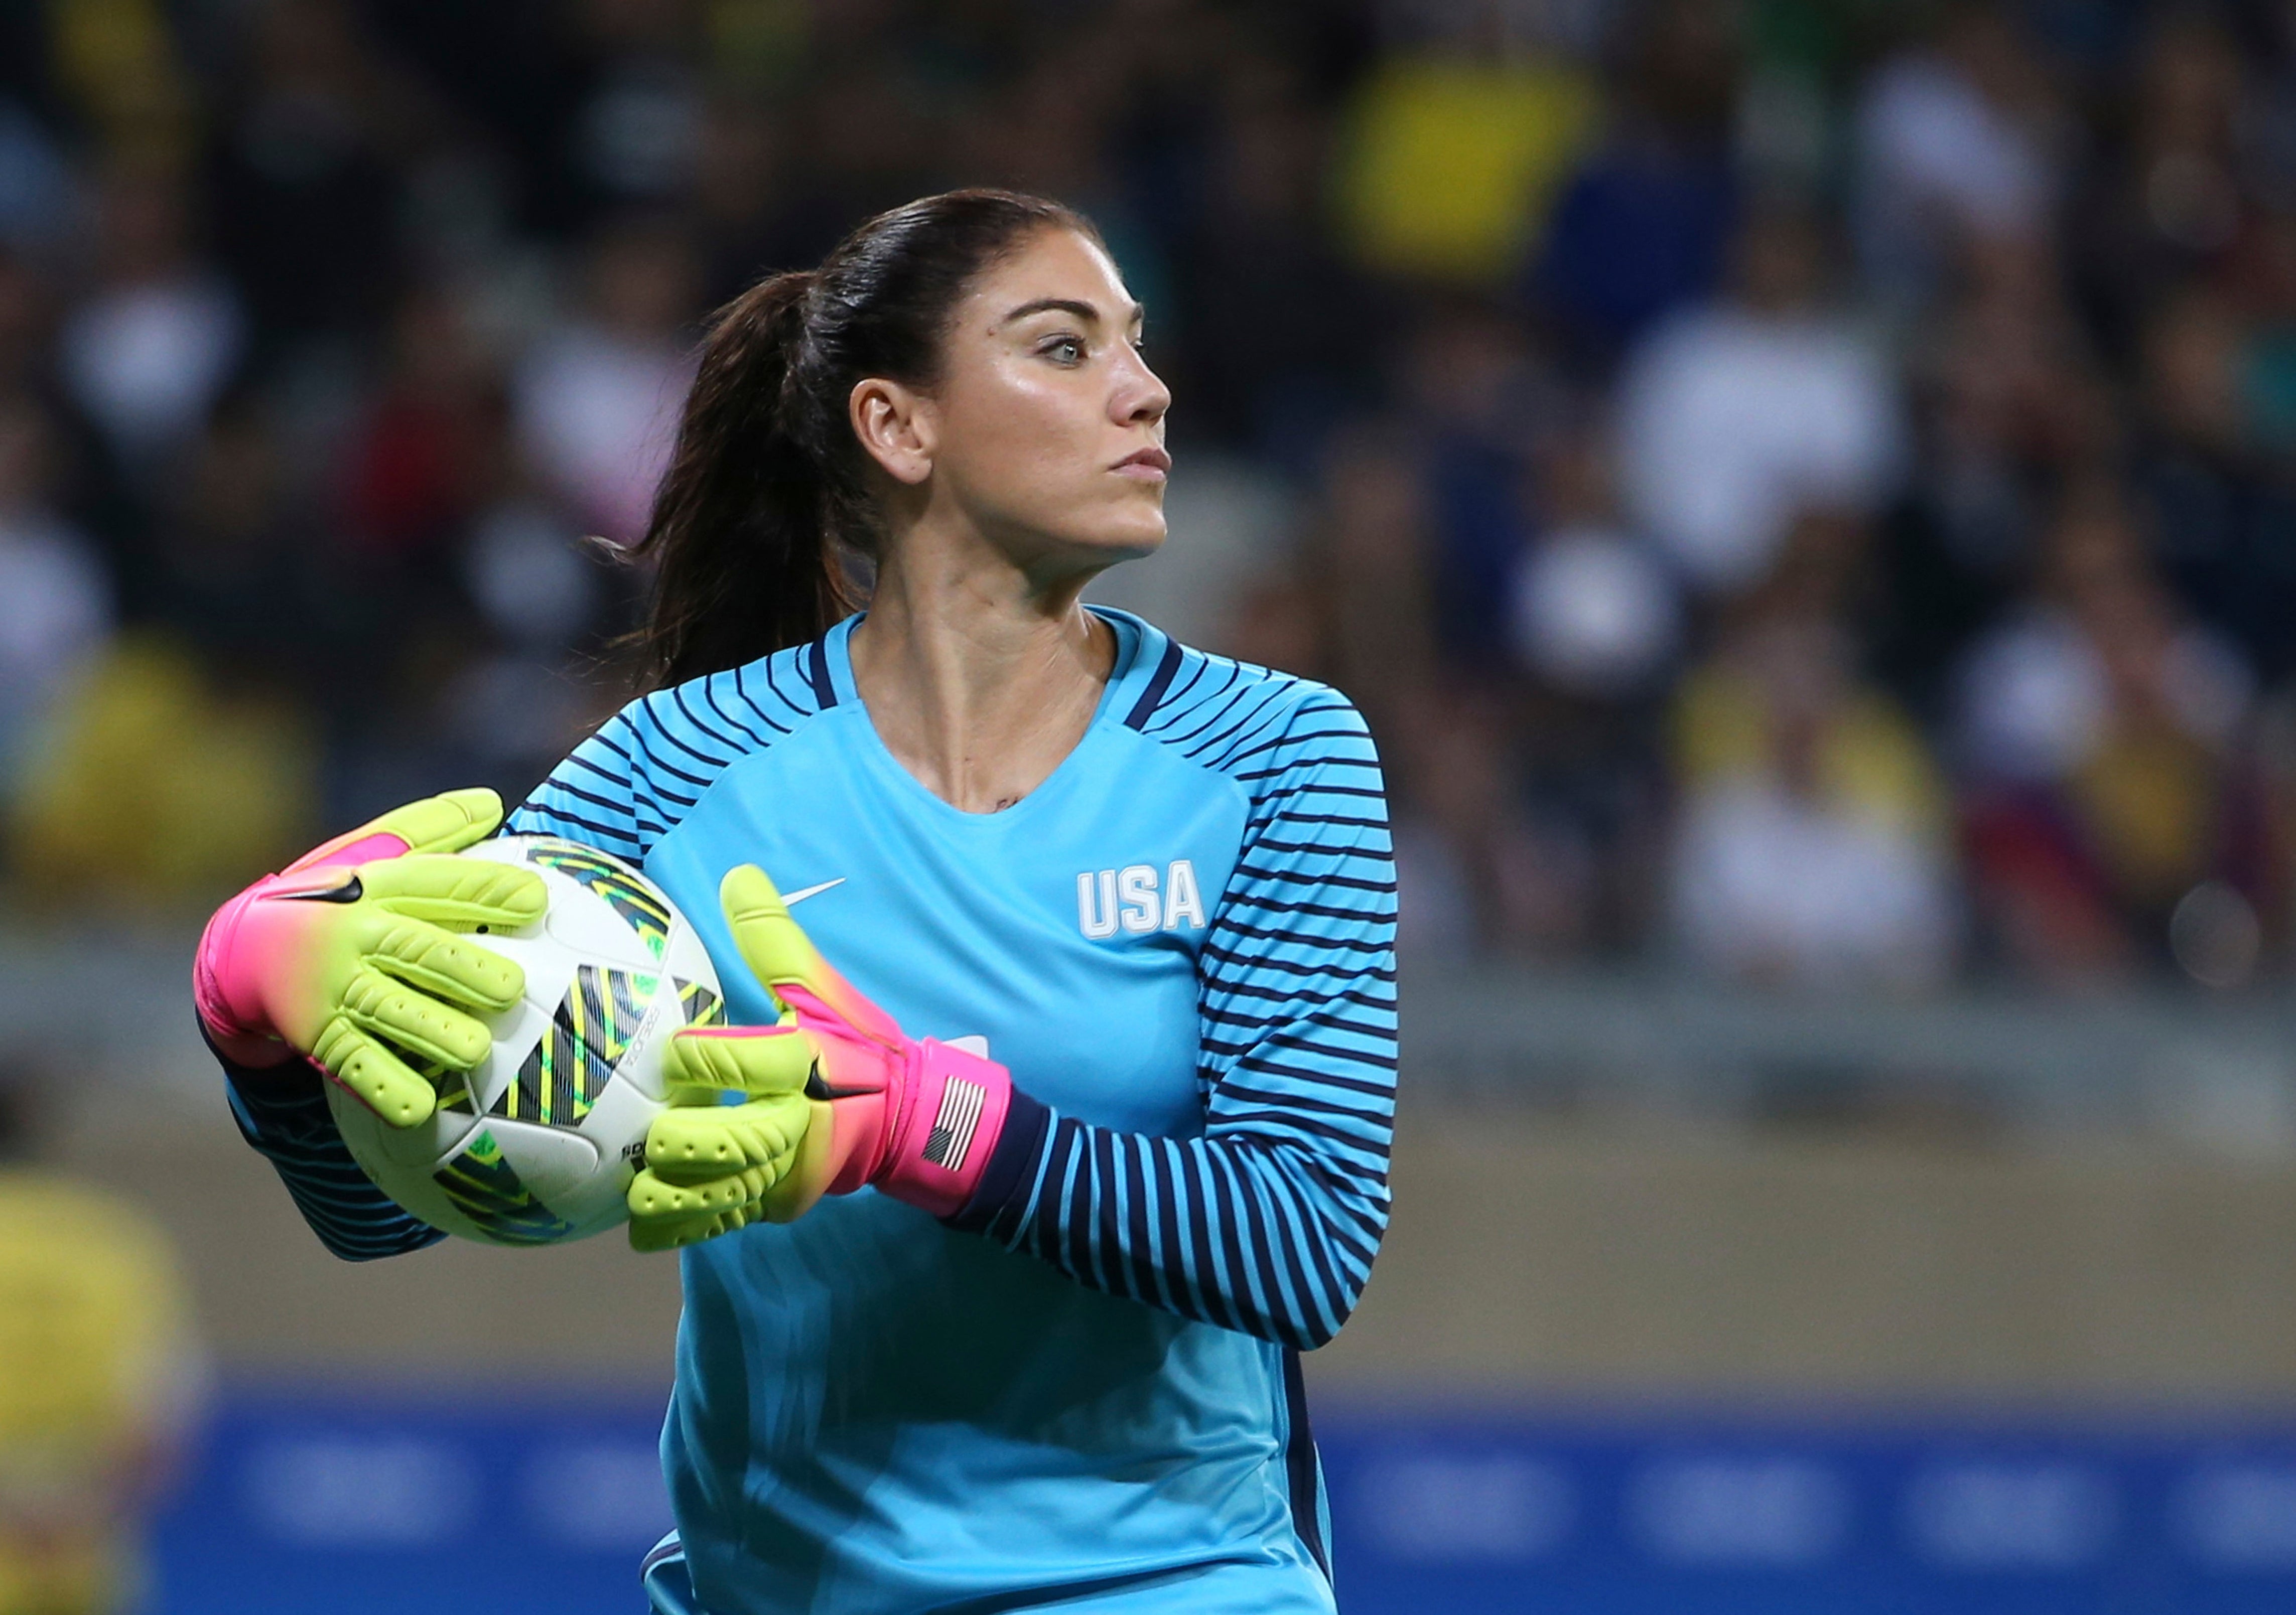 United States goalkeeper Hope Solo takes the ball during a women's soccer game at the Rio Olympics against New Zealand on Aug. 3, 2016